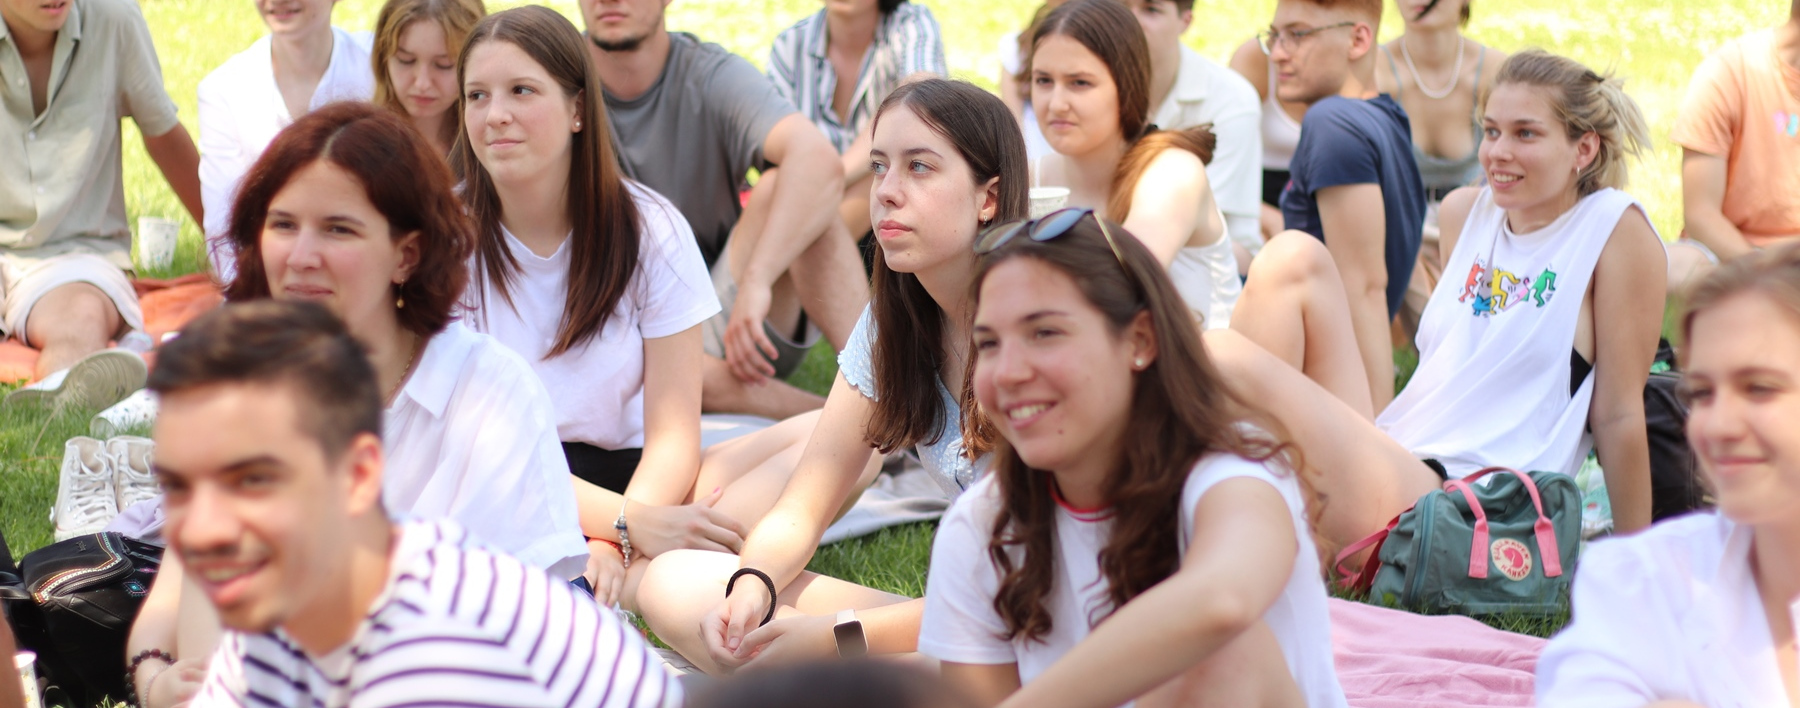 Applicants to the Faculty of Pharmacy were invited to a picnic